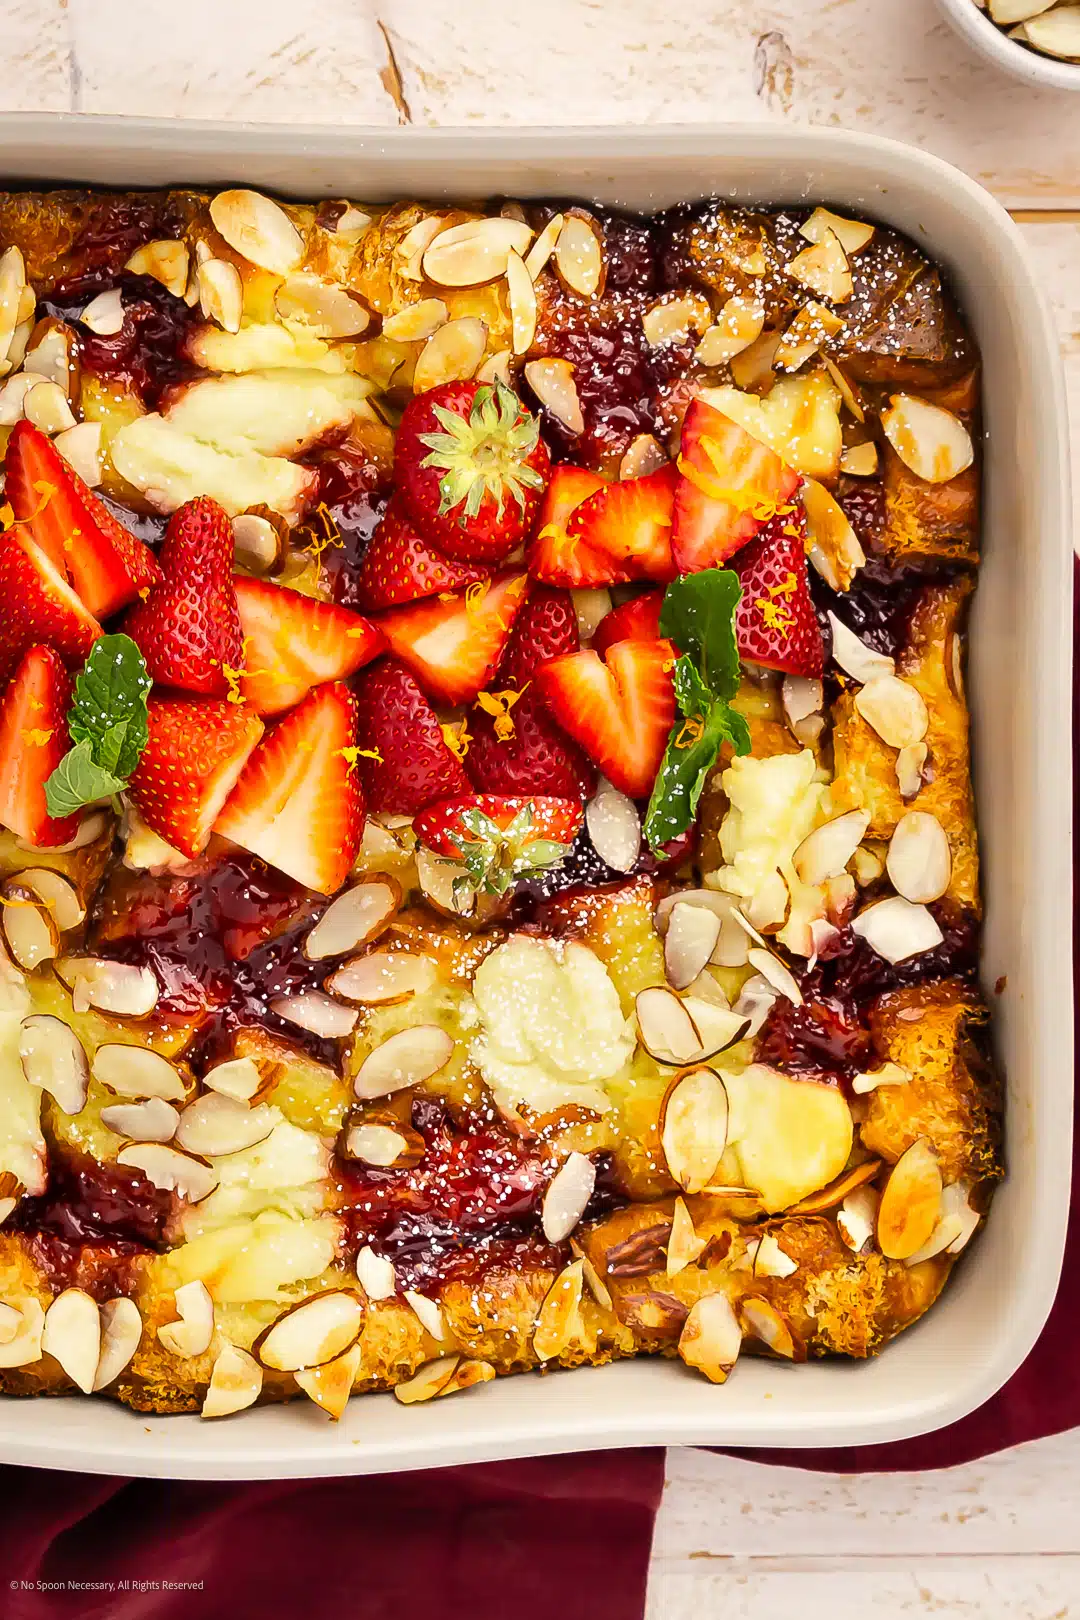 Overhead photo of a breakfast sweet casserole garnished with sliced berries and toasted almonds.